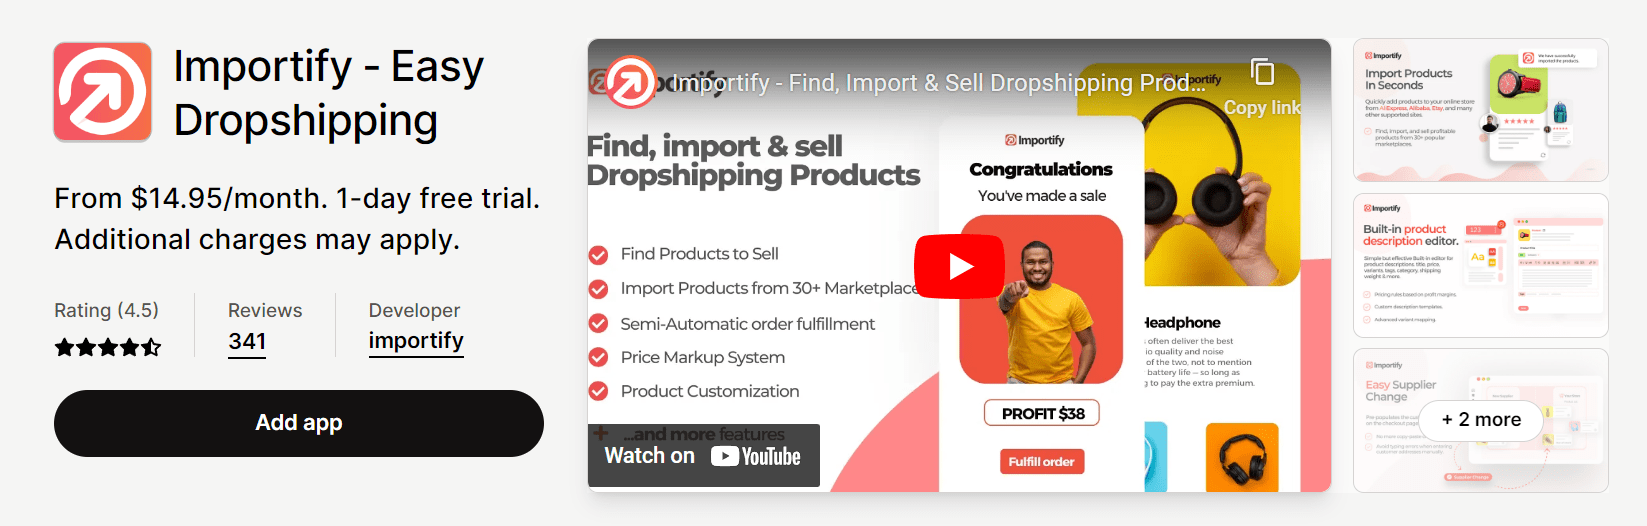 Importify dropshipping app